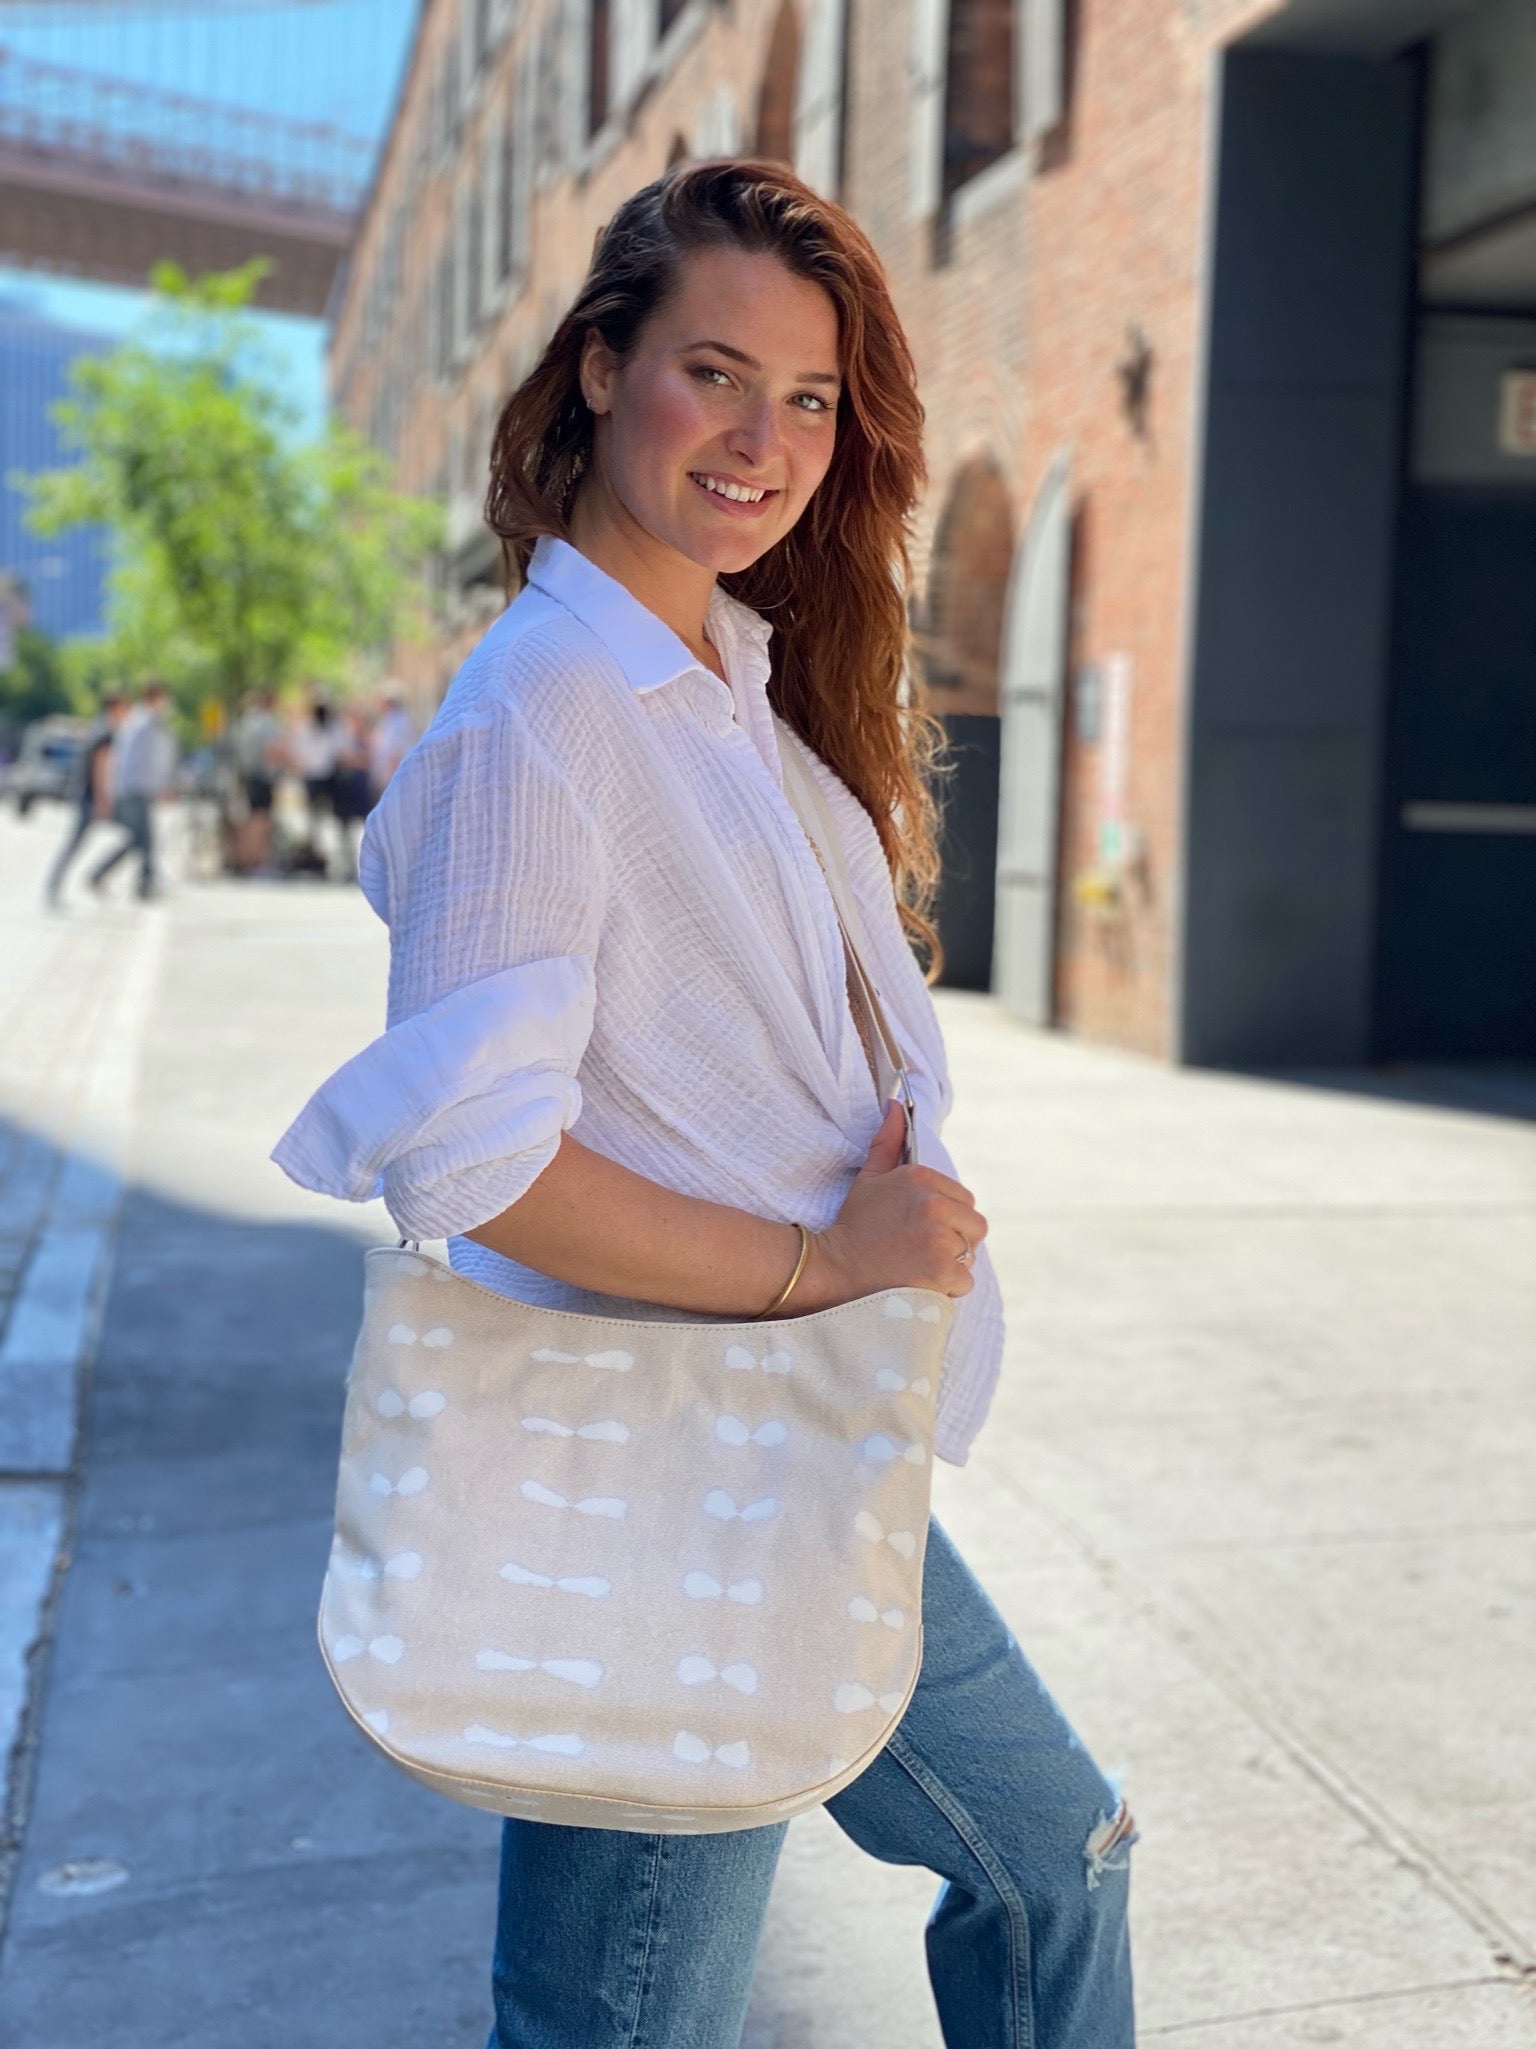 Stone Shibori City Bag with Tans and White IMAGINE Strap Only $38 + FREE Strap (a $168 value) - Quilted Koala